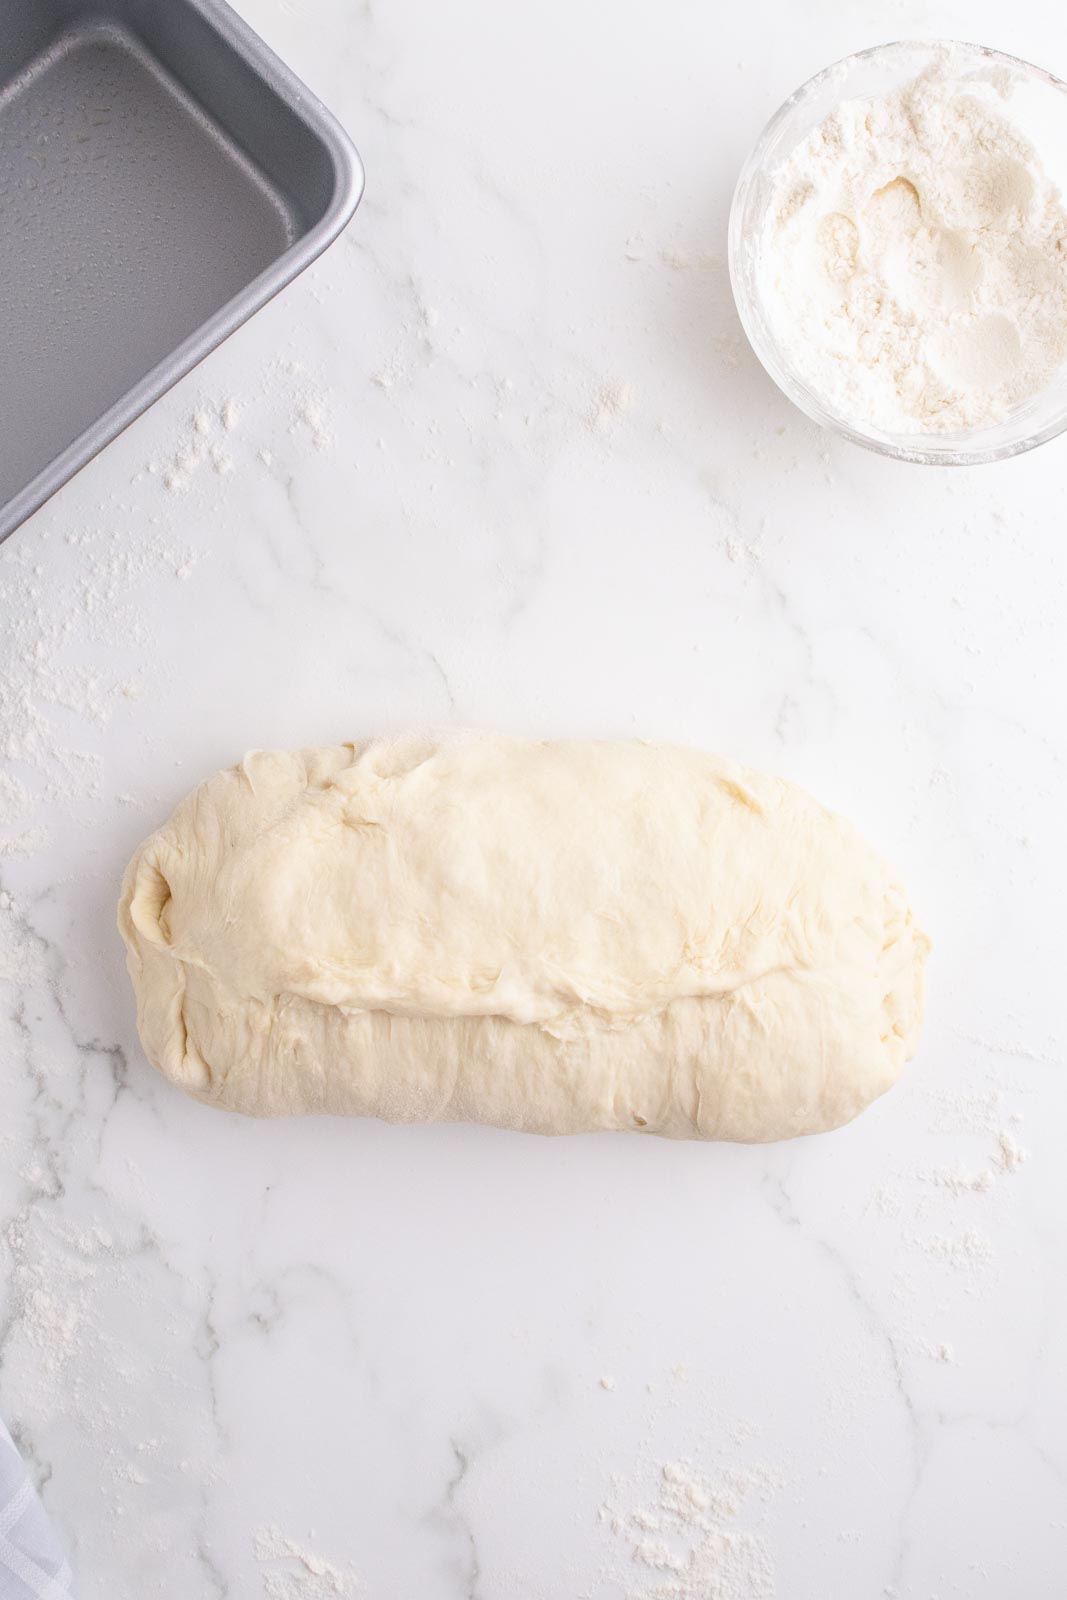 Shaping mashed potato bread dough into a loaf.